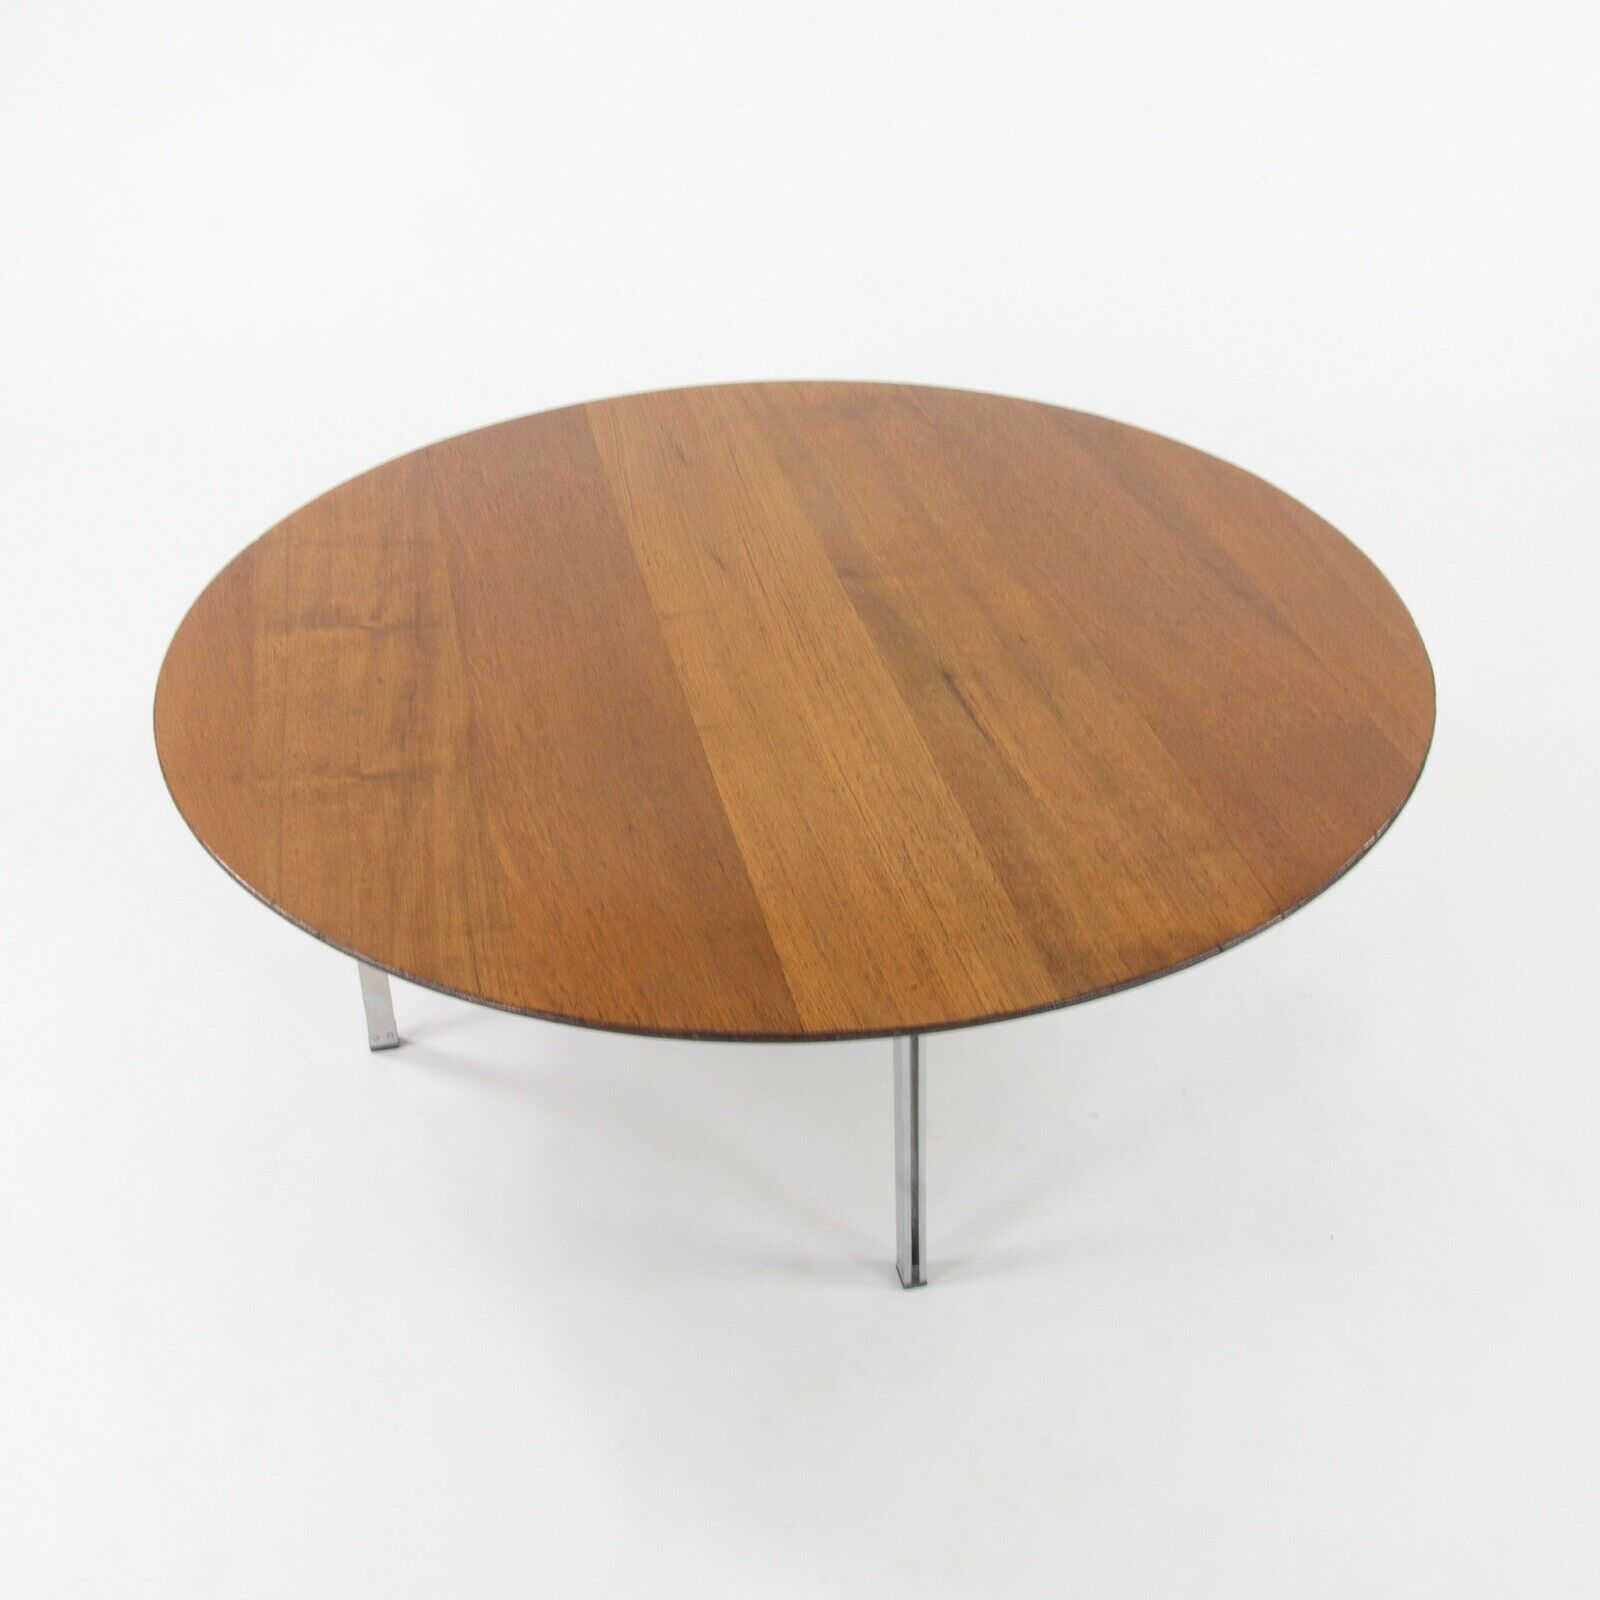 1951 Florence Knoll Associates 42 inch Parallel Bar Series Coffee Table Walnut